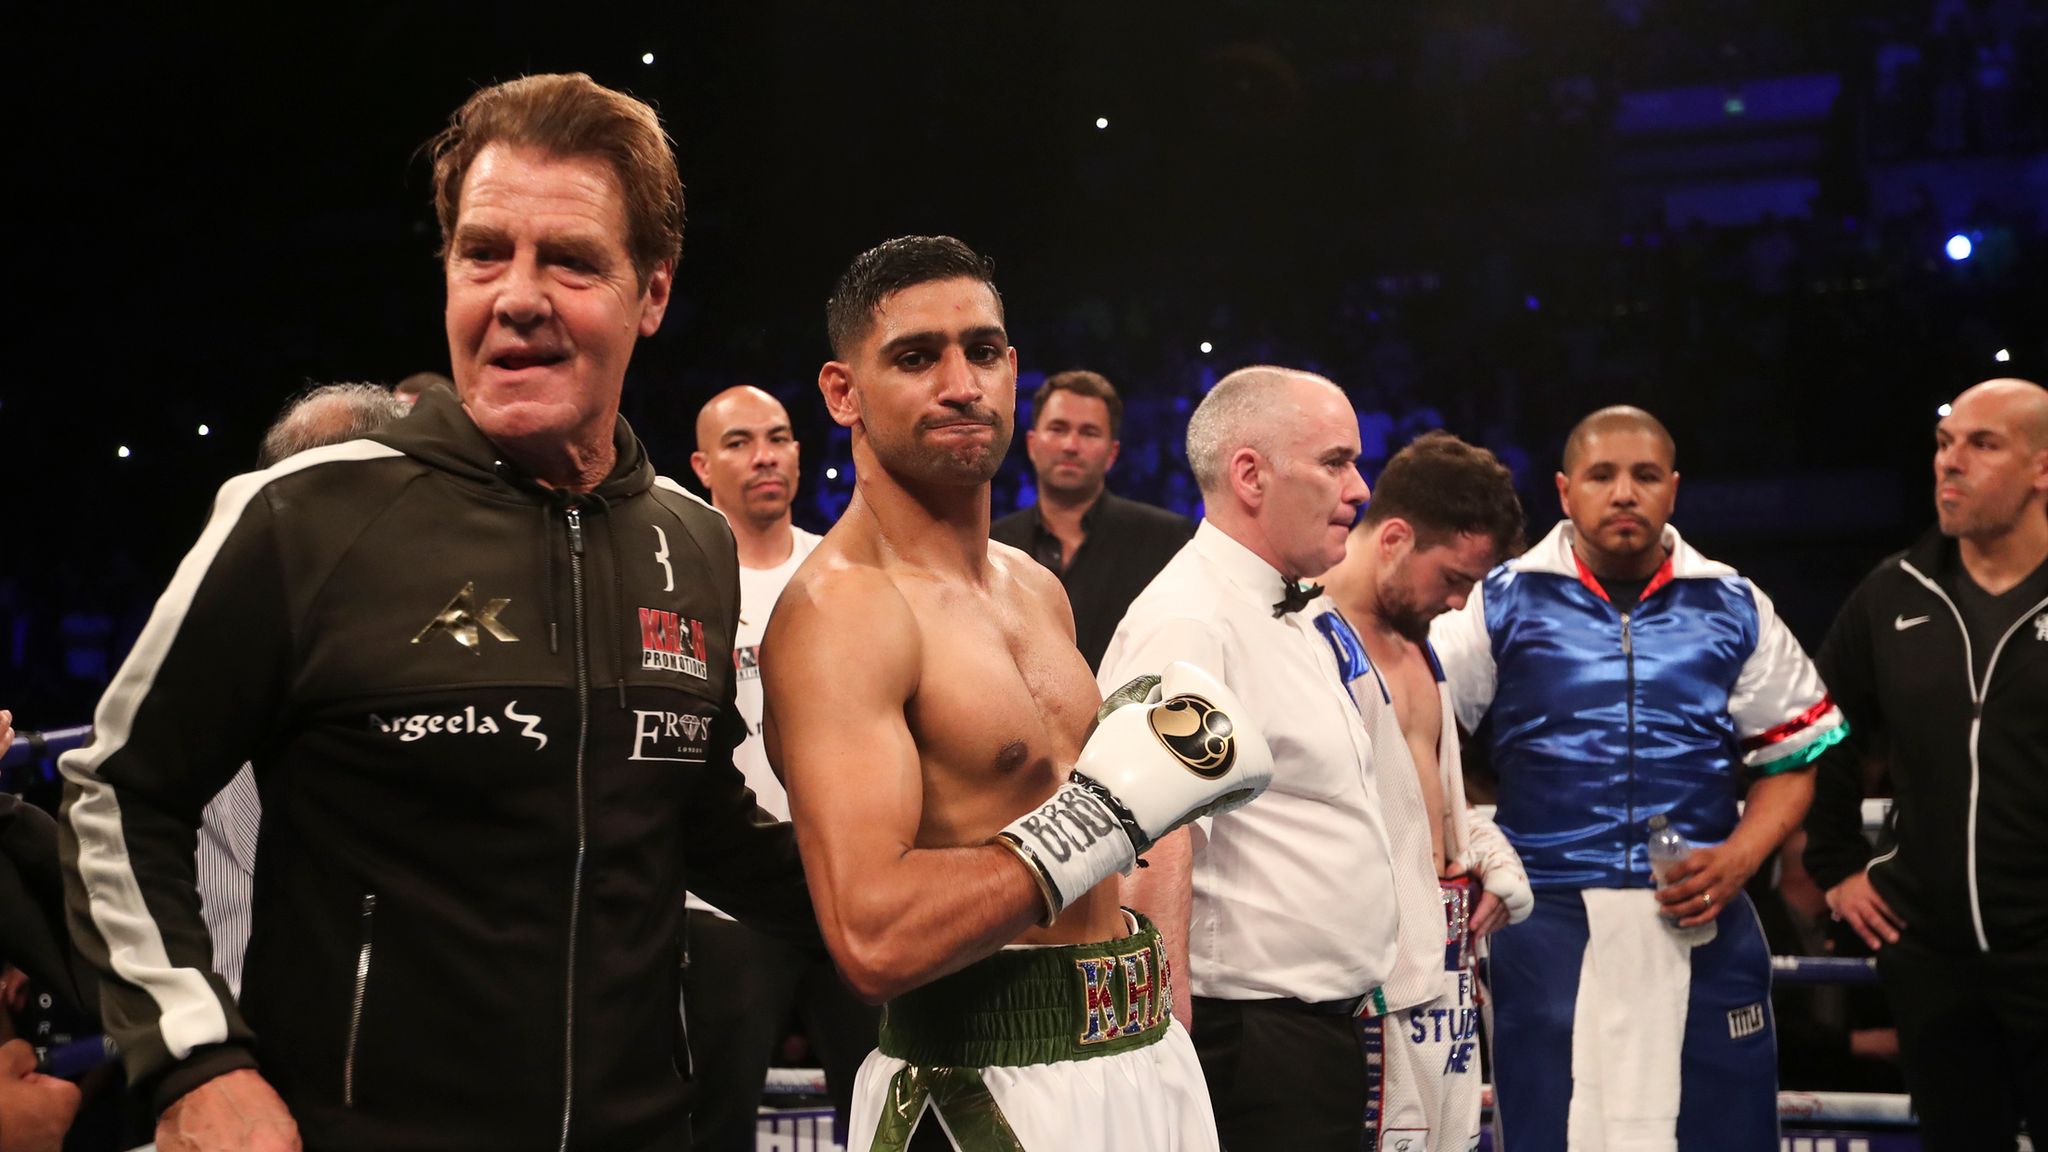 Khan vs Vargas Trainer Joe Goossen explains the impact of Amir Khans speed and open-minded approach Boxing News Sky Sports